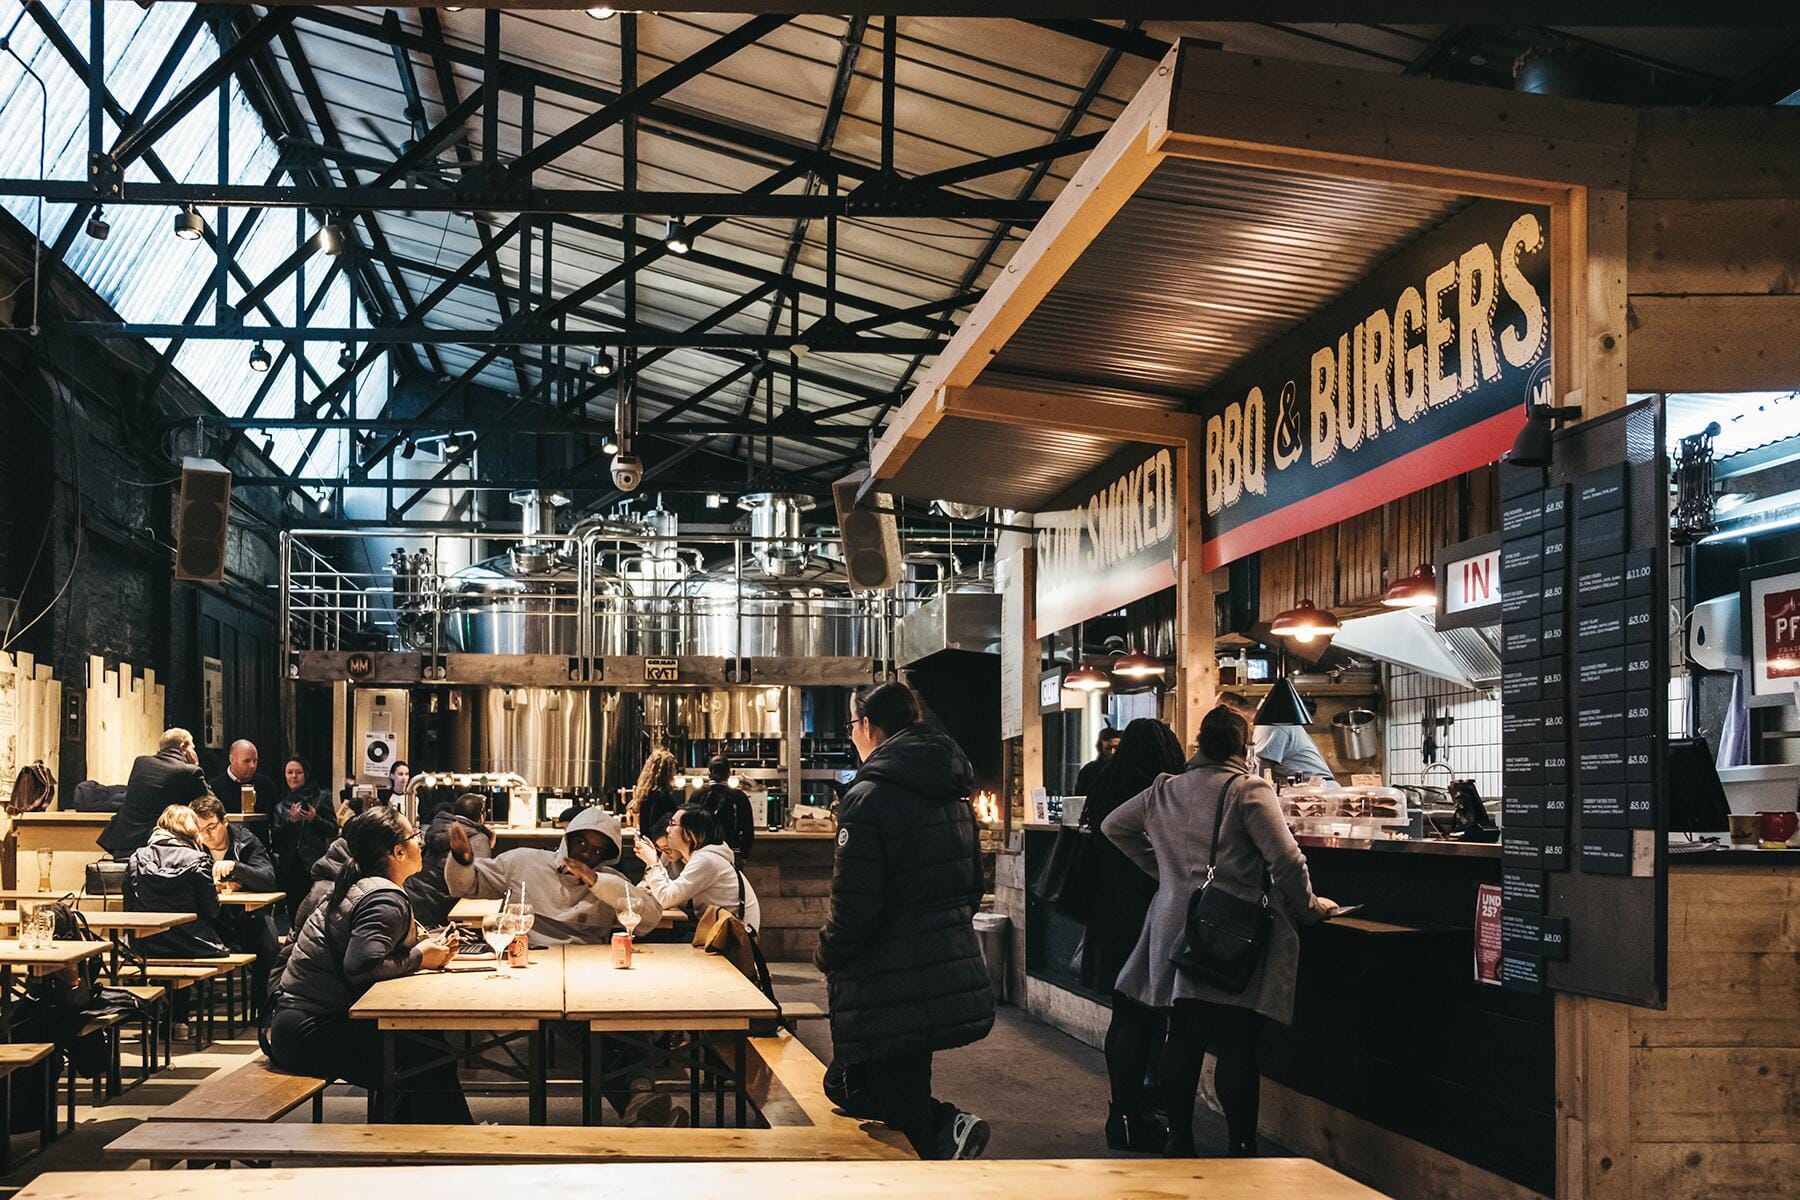 <a href='https://www.fodors.com/world/europe/england/london/experiences/news/photos/the-11-best-street-markets-to-visit-in-london#'>From &quot;The 11 Best Street Markets to Visit in London: Mercato Metropolitano&quot;</a>